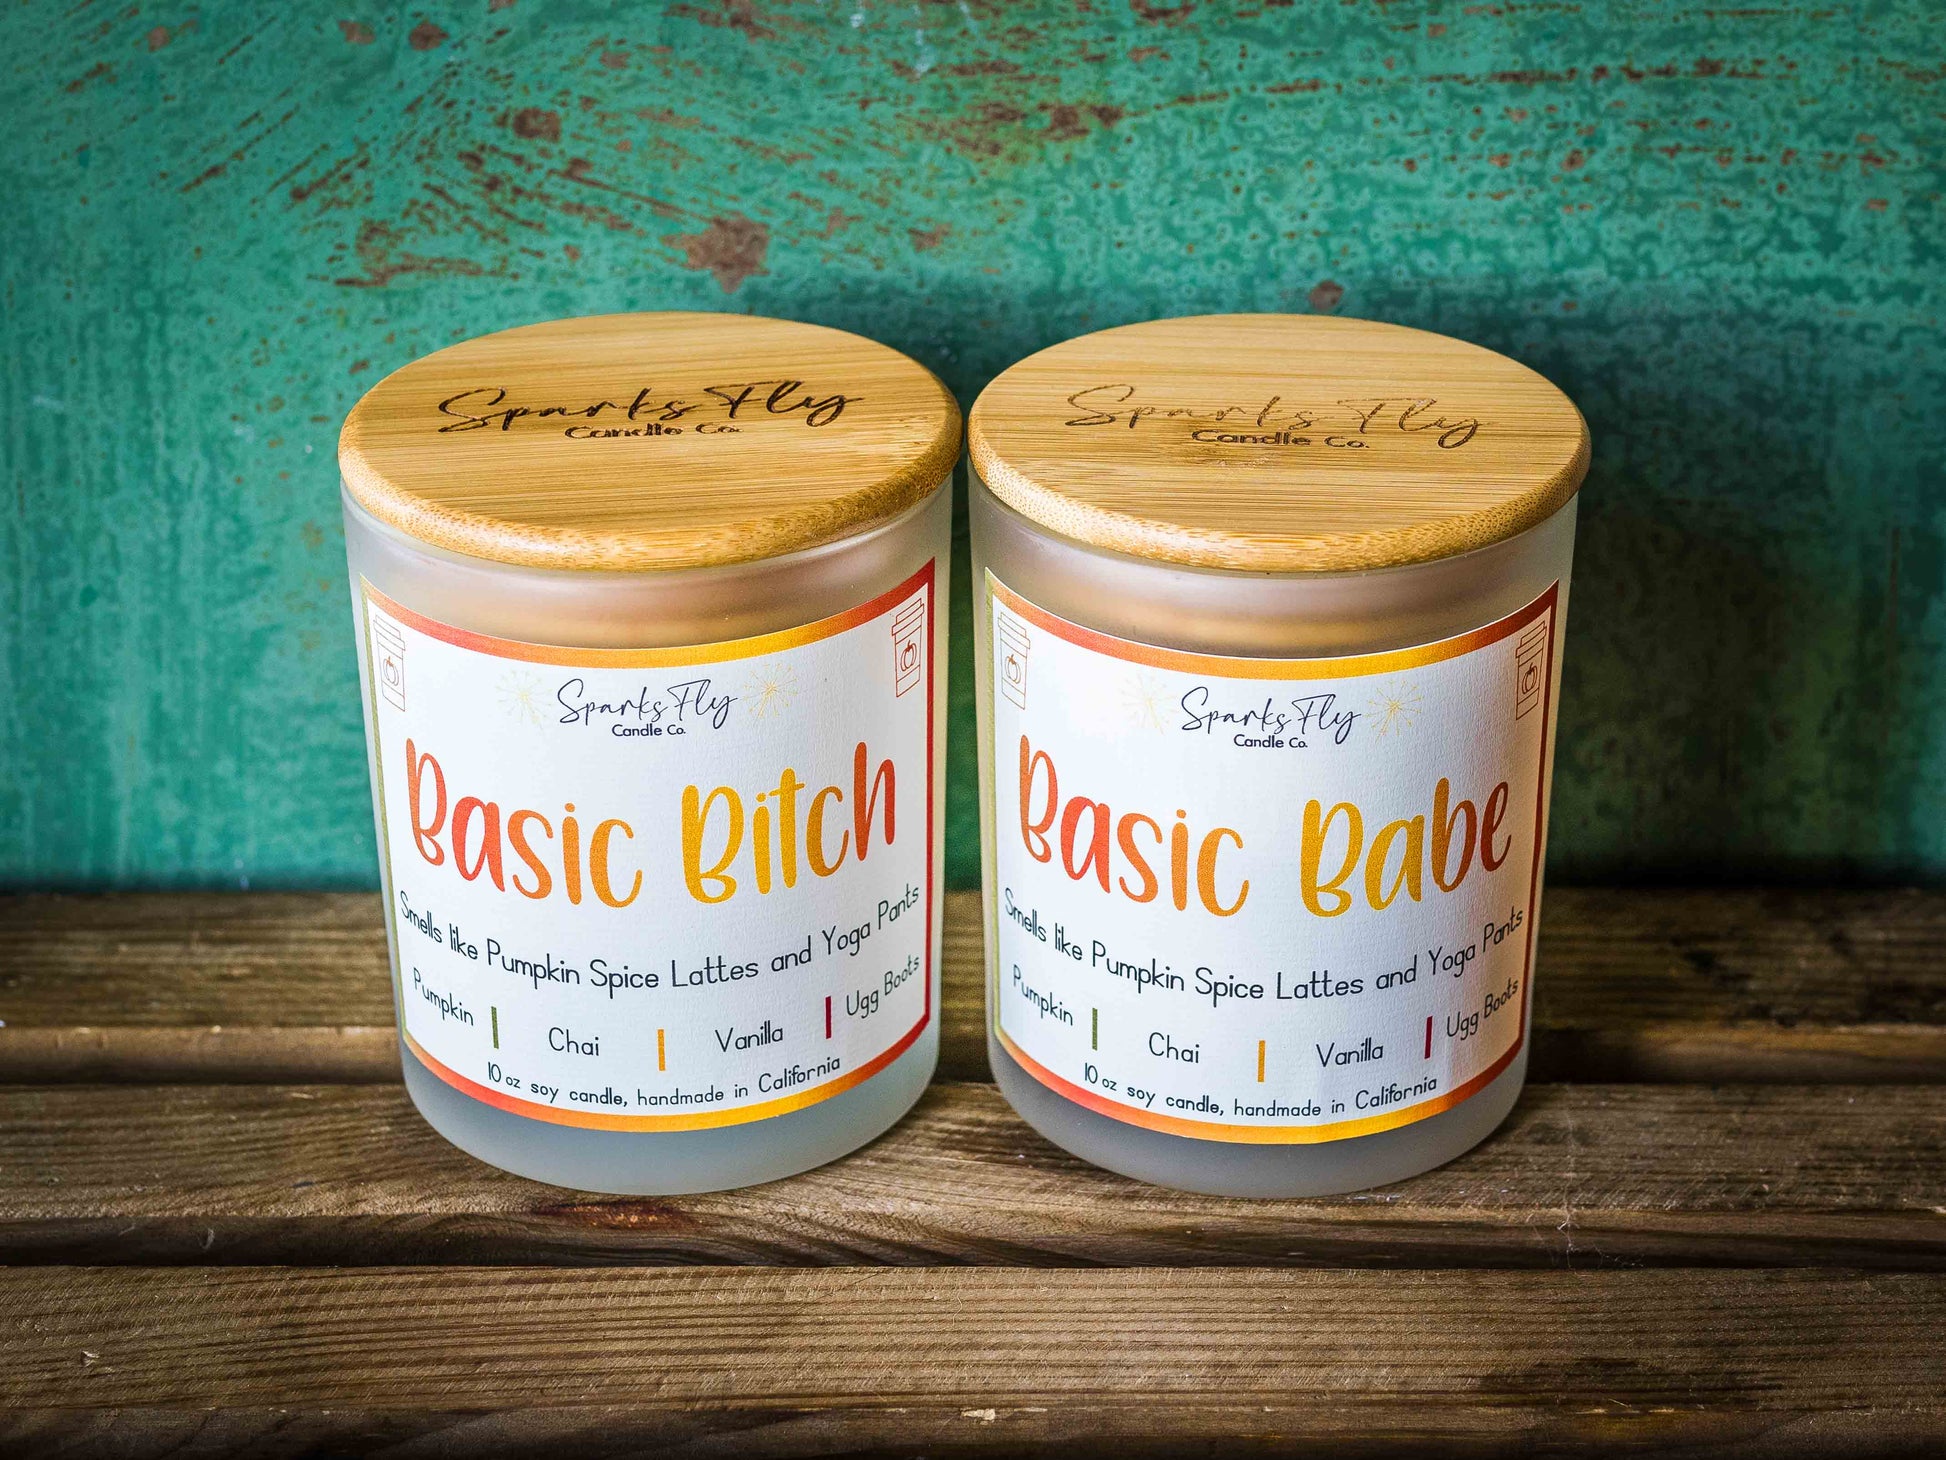 Basic Bitch sassy candle; encapsulating the essence of pumpkin spice lattes and the comfort of yoga pants. satire